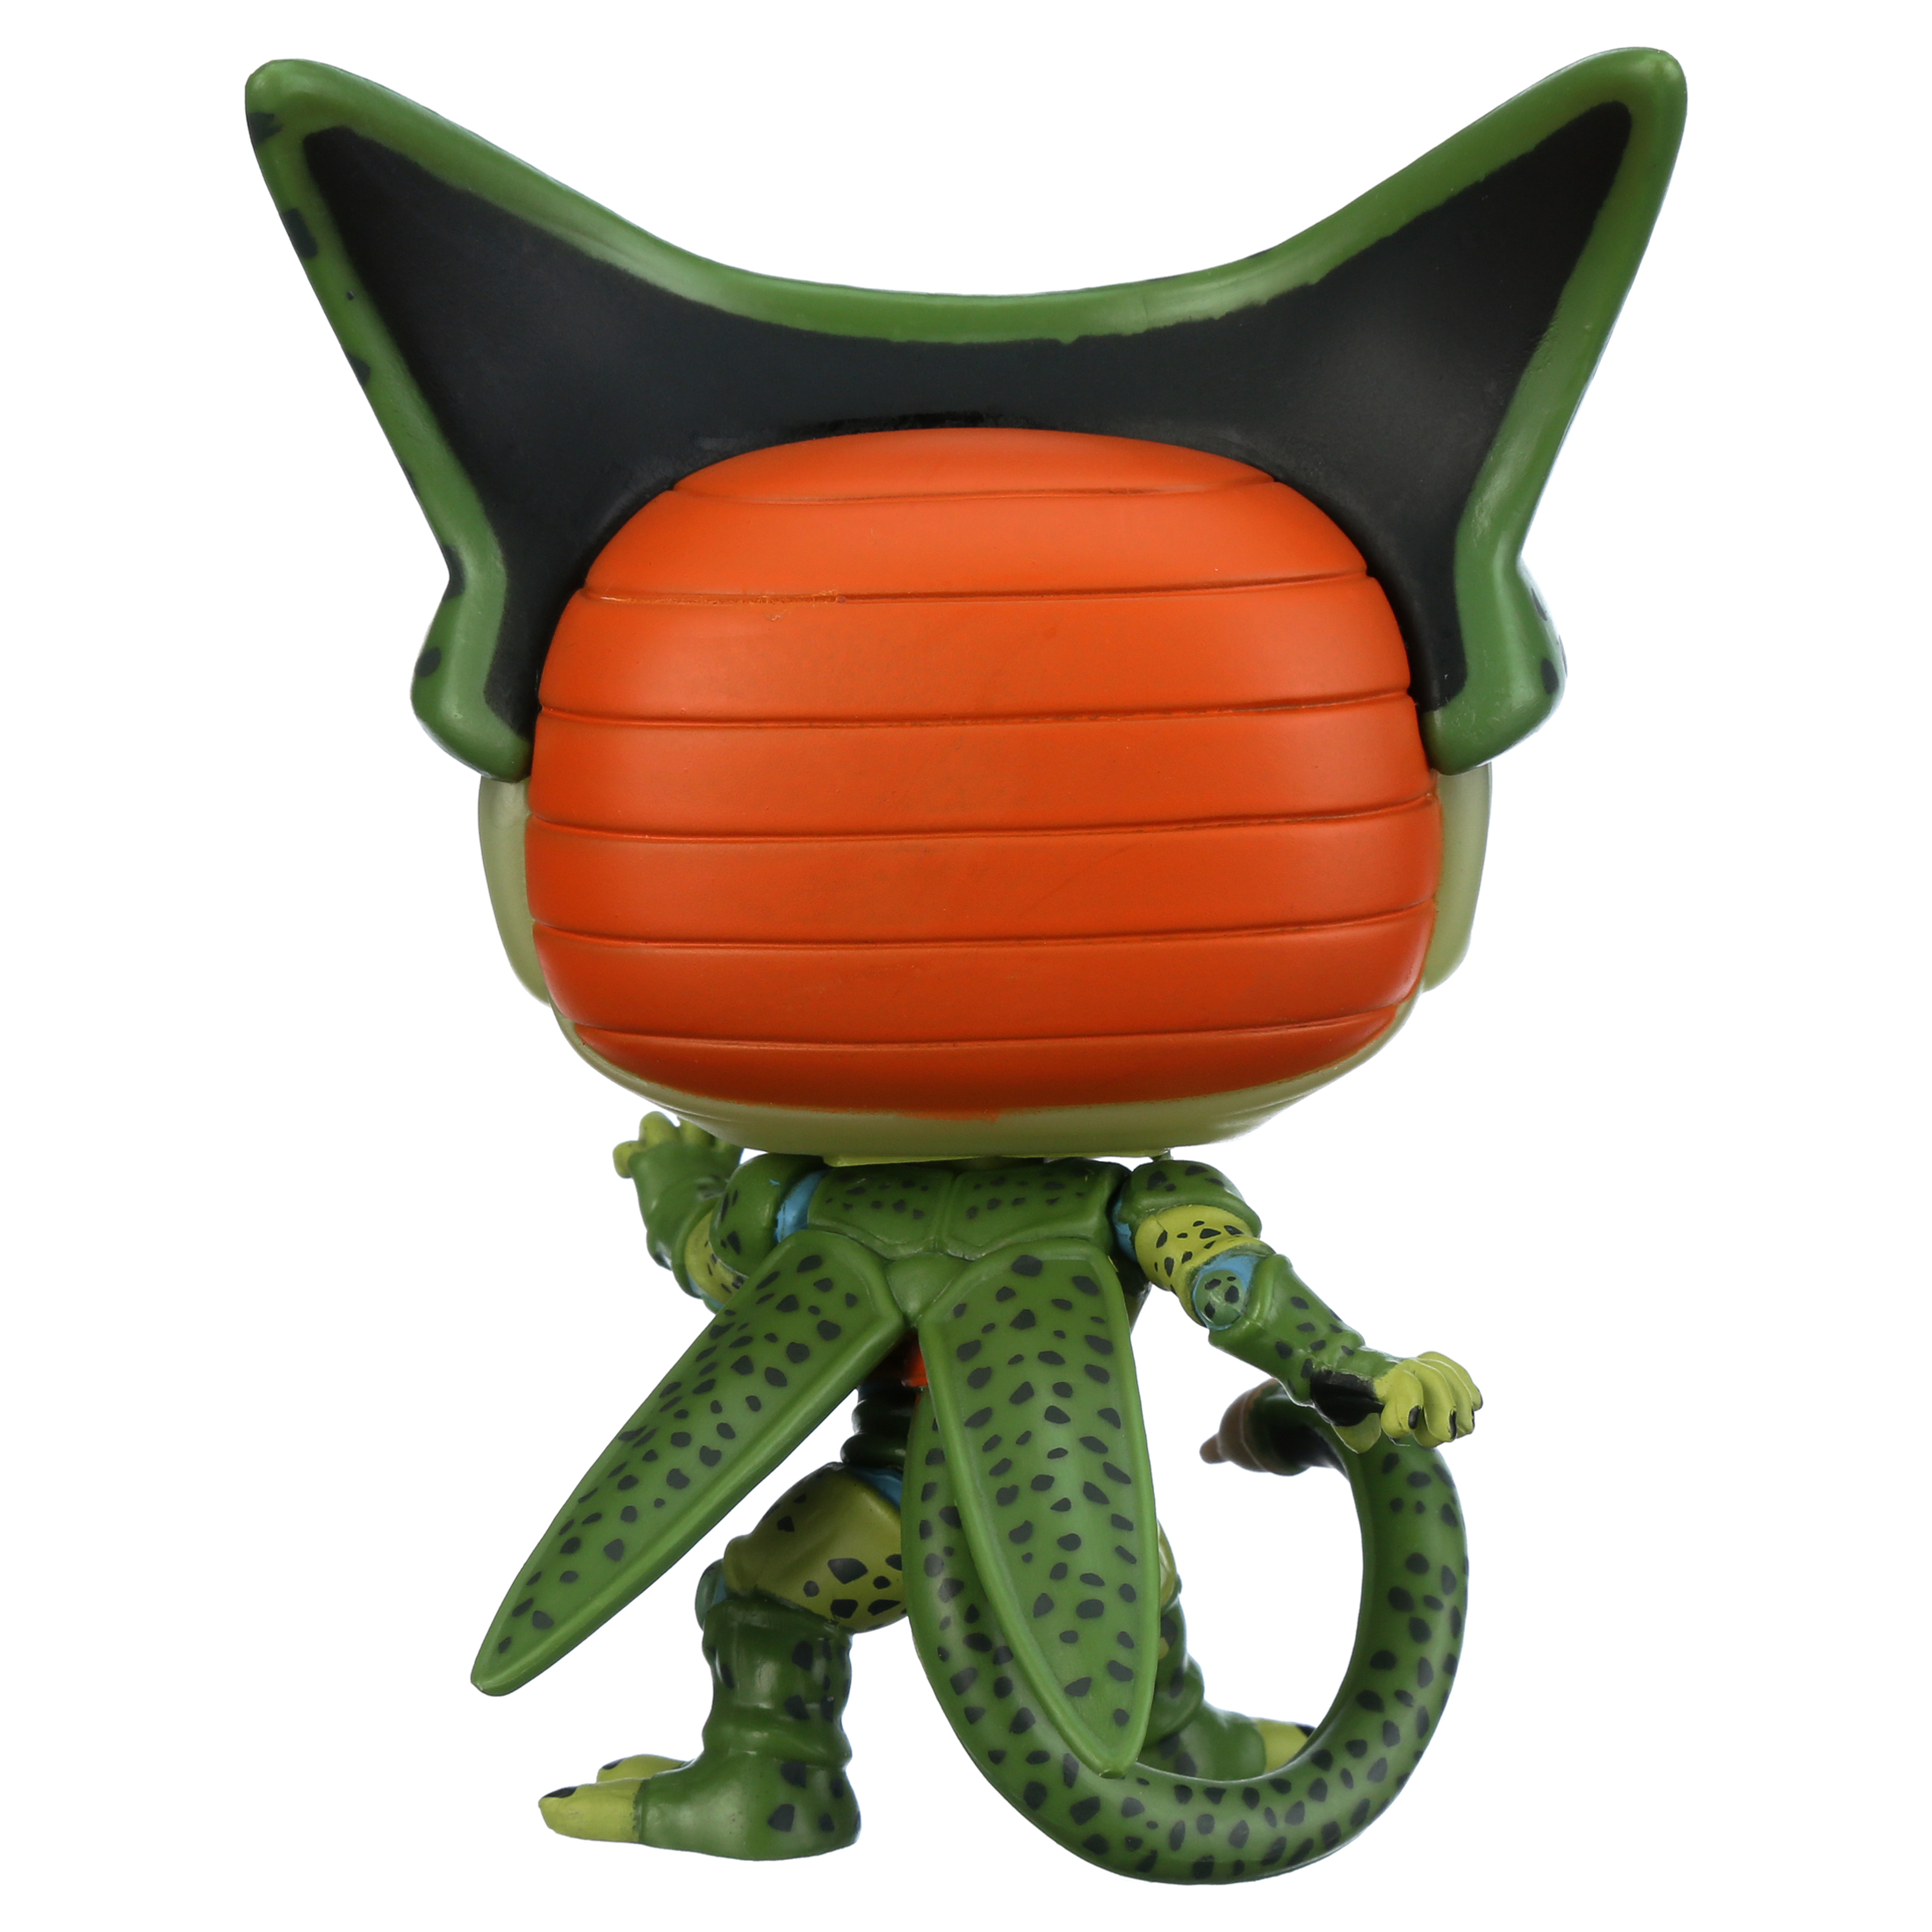 Funko POP! Animation: Dragon Ball Z - Cell (First Form) (Glow) - Walmart Exclusive - image 4 of 6